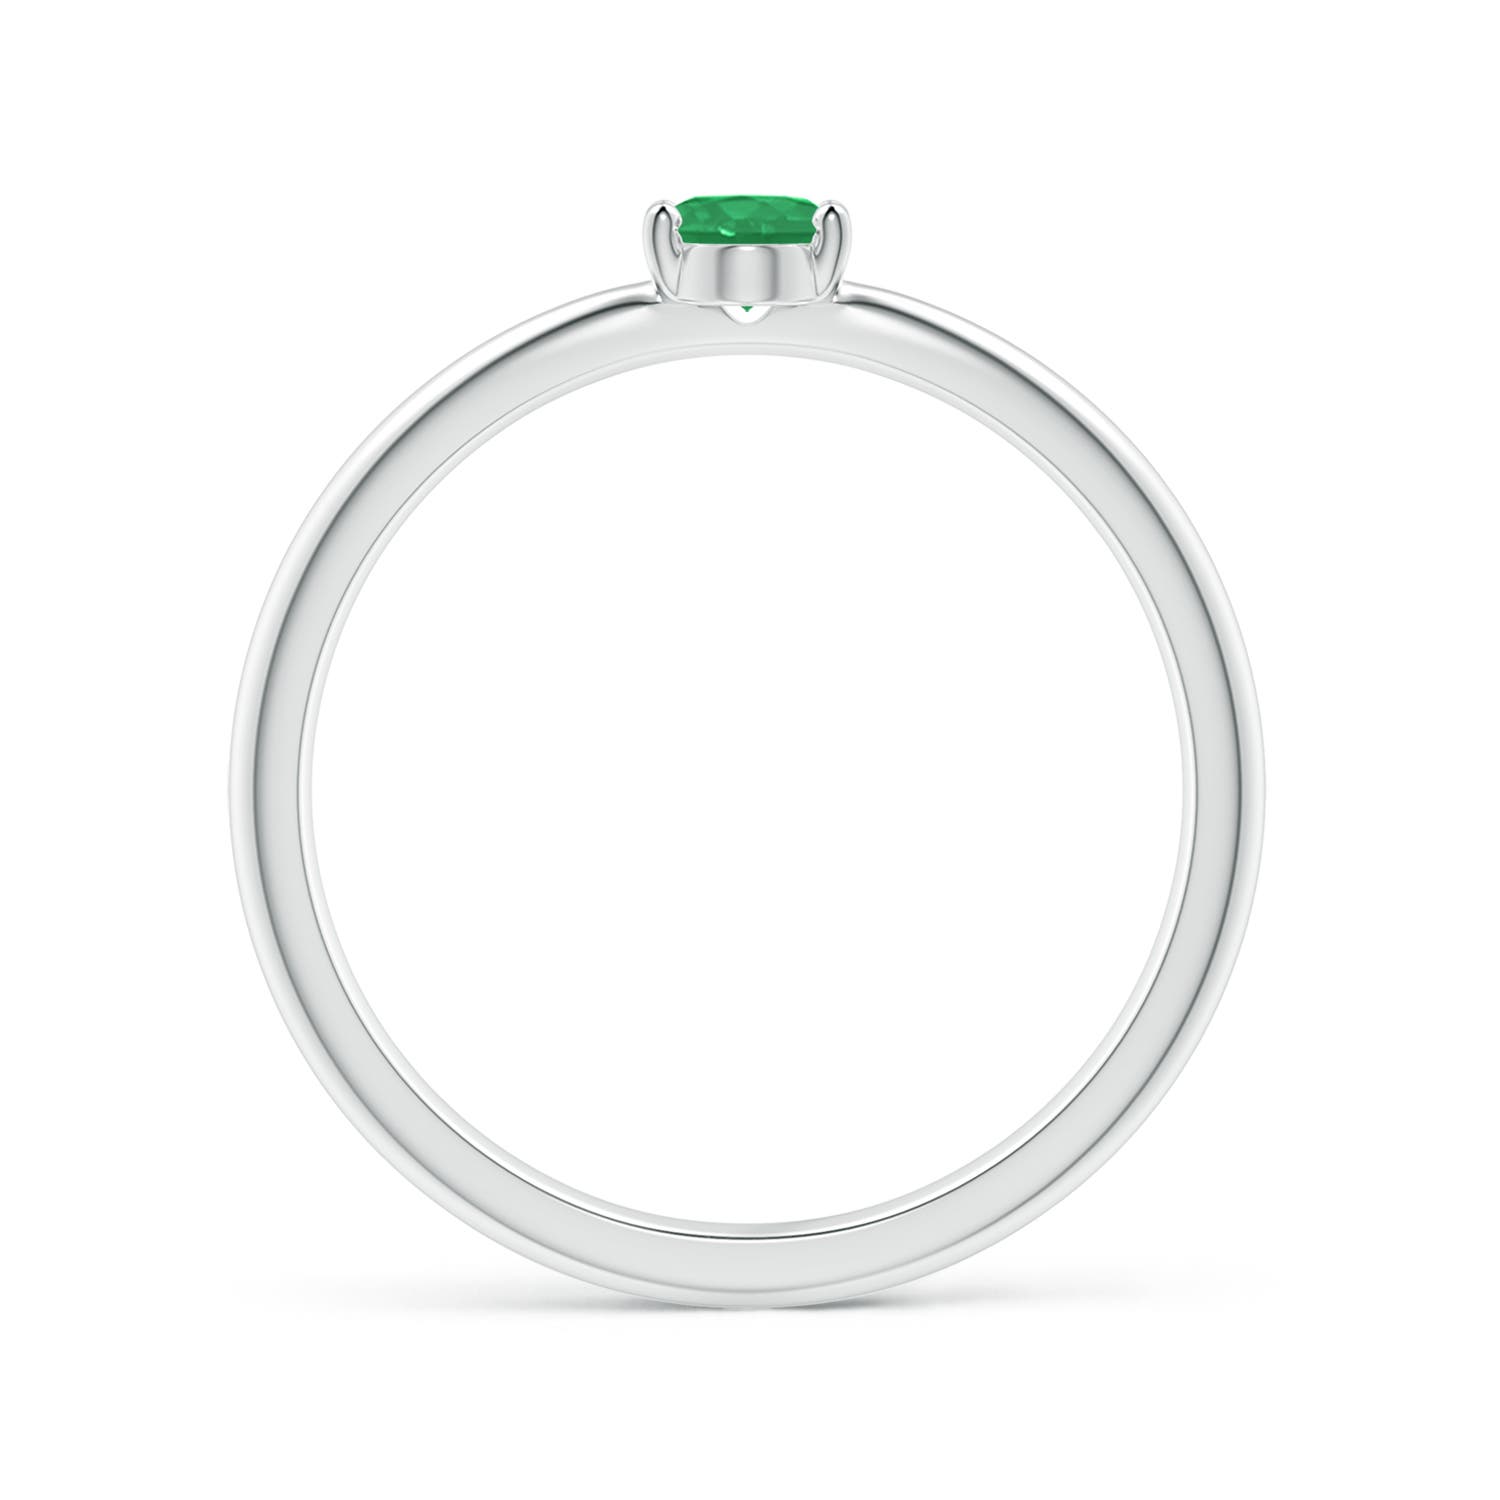 A - Emerald / 0.3 CT / 14 KT White Gold